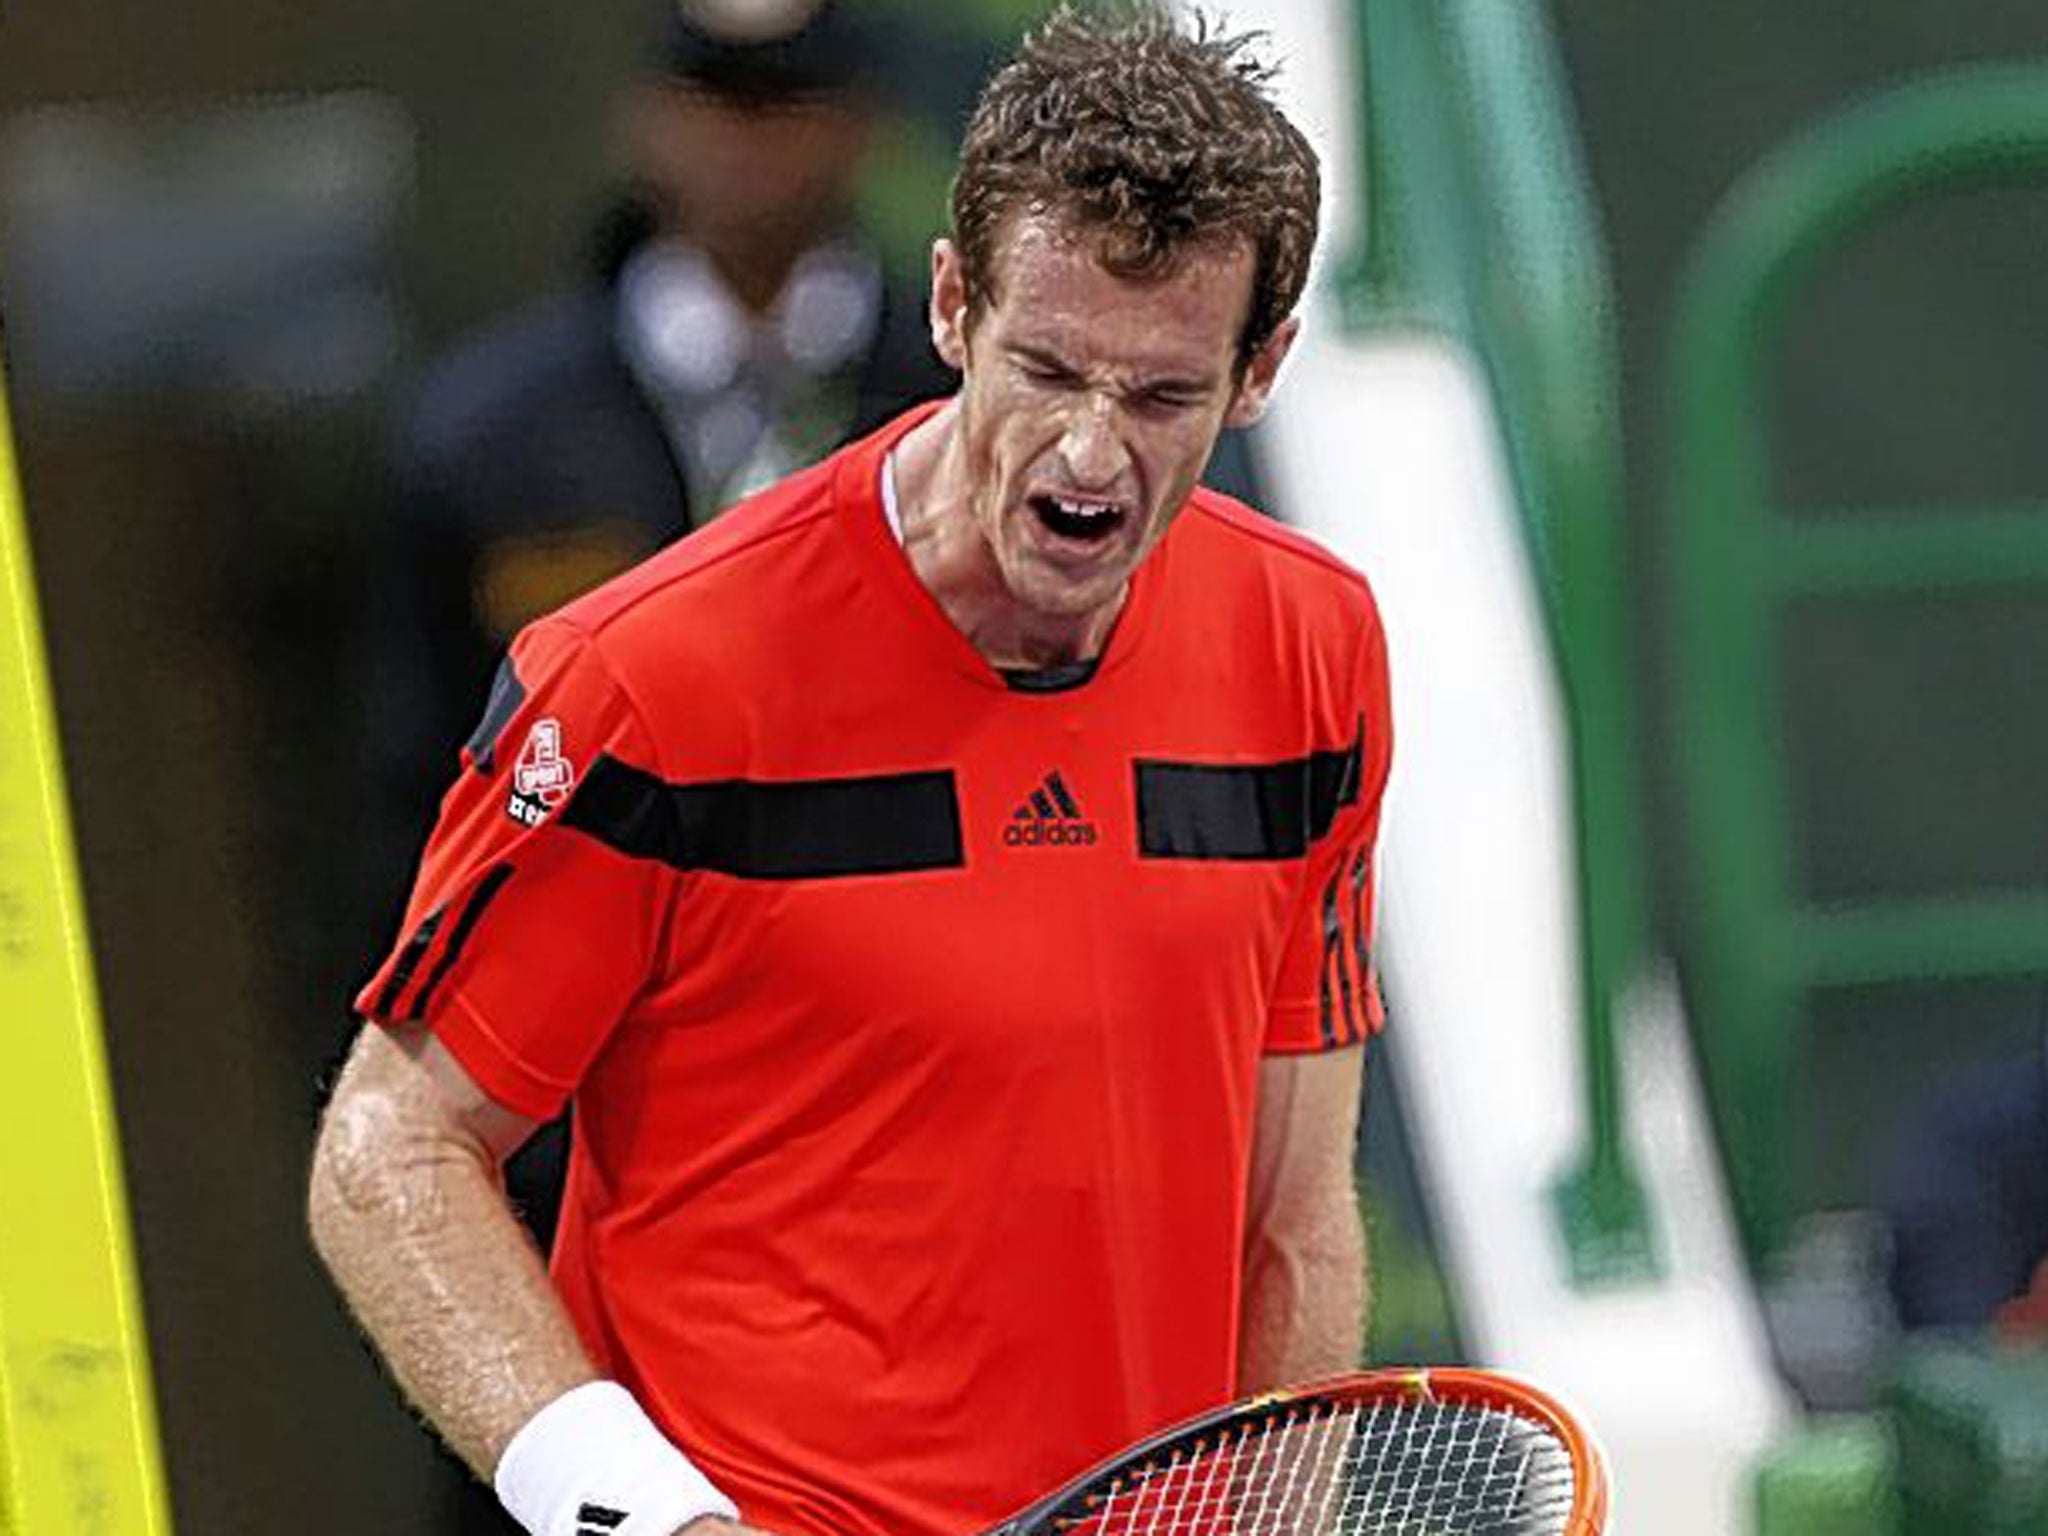 Andy Murray reacts during his defeat to Florian Mayer